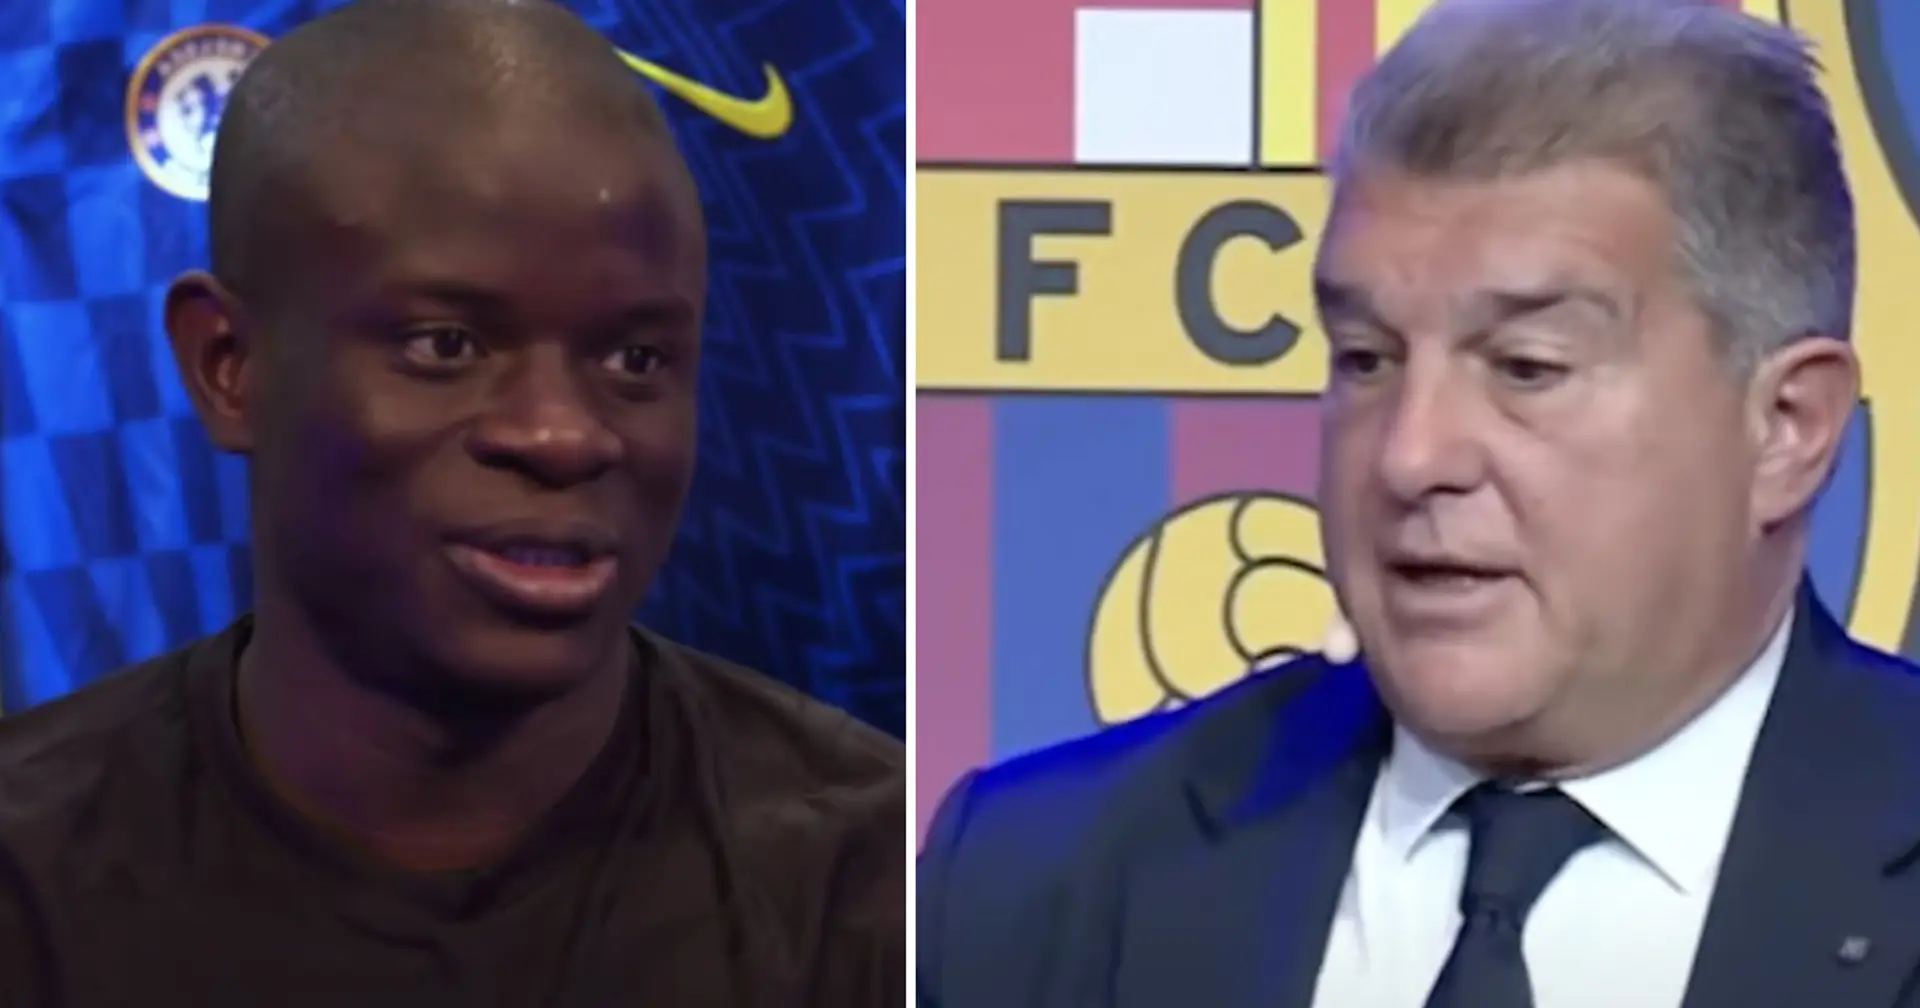 Kante rejects Chelsea's contract proposal -- he's waiting for Barca to step in (reliability: 4 stars)